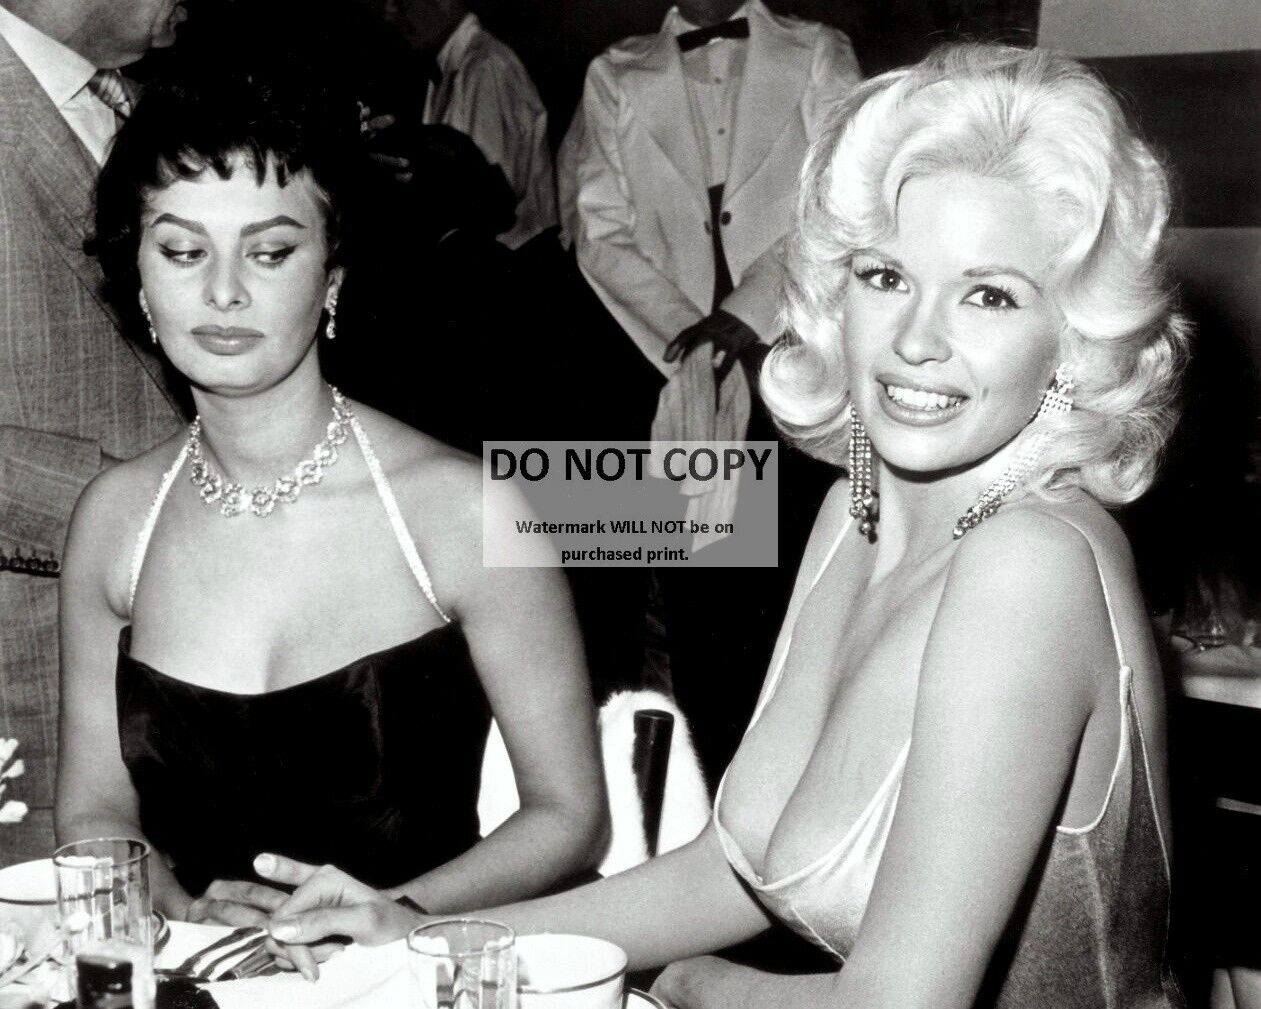 SOPHIA LOREN & JAYNE MANSFIELD AT A PARTY IN 1957- 8X10 PUBLICITY PHOTO (AB-150)